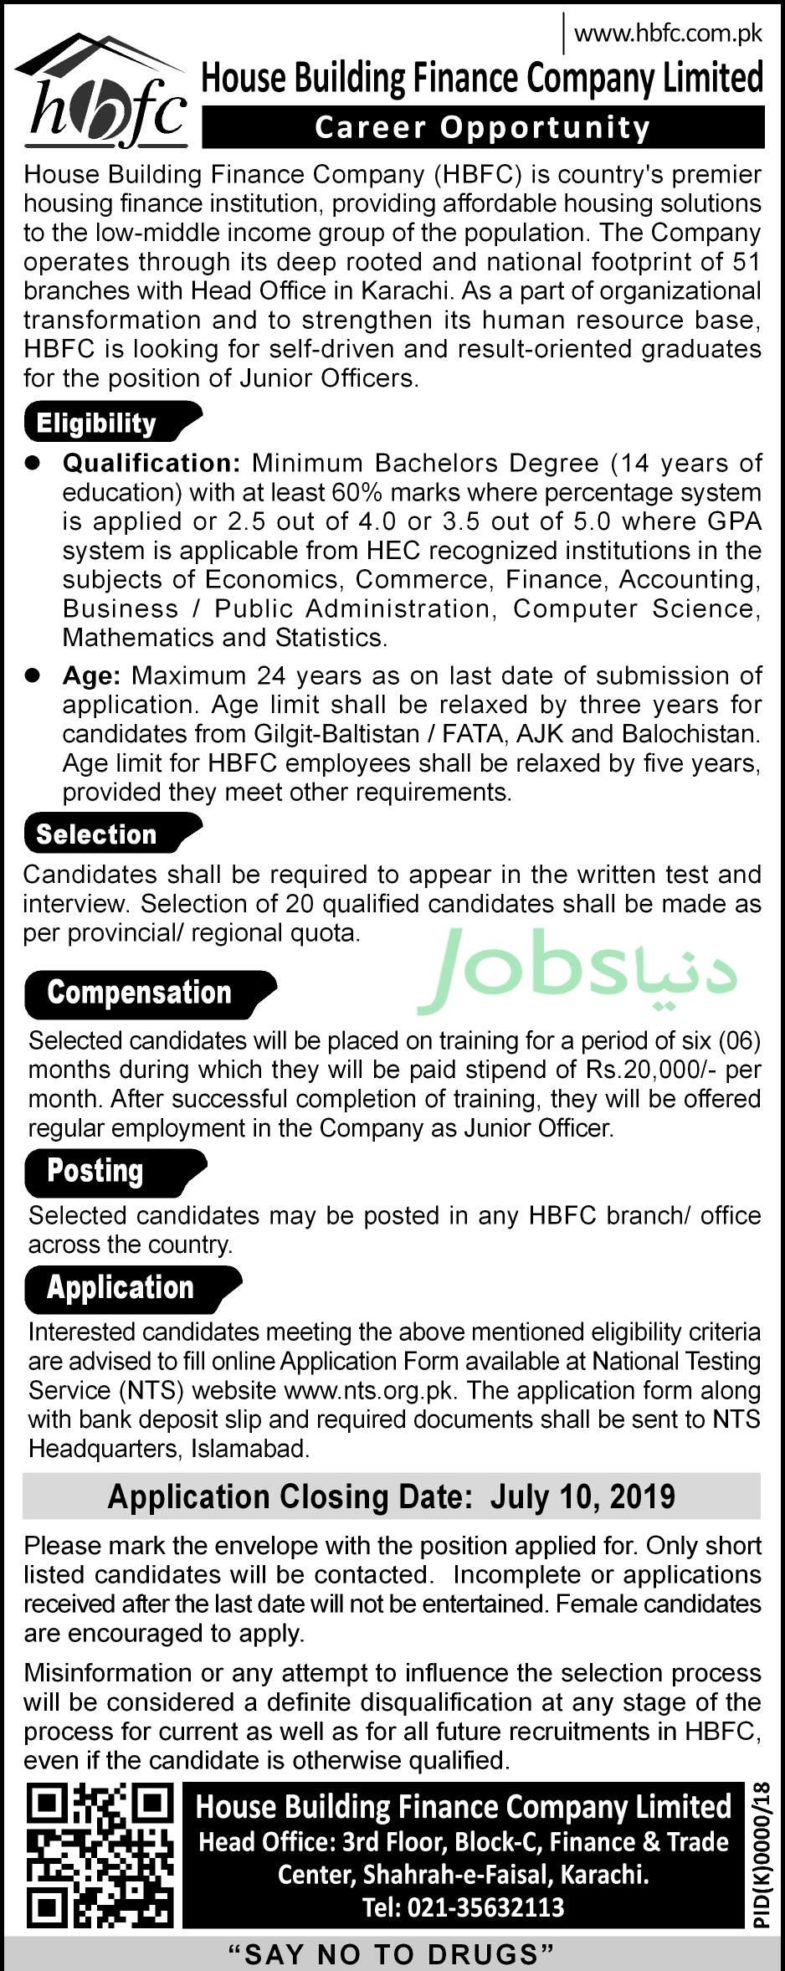 House Building Finance Company / HBFC Jobs 2019 For Graduates & Junior Officers (All Pakistan) – Download NTS Form